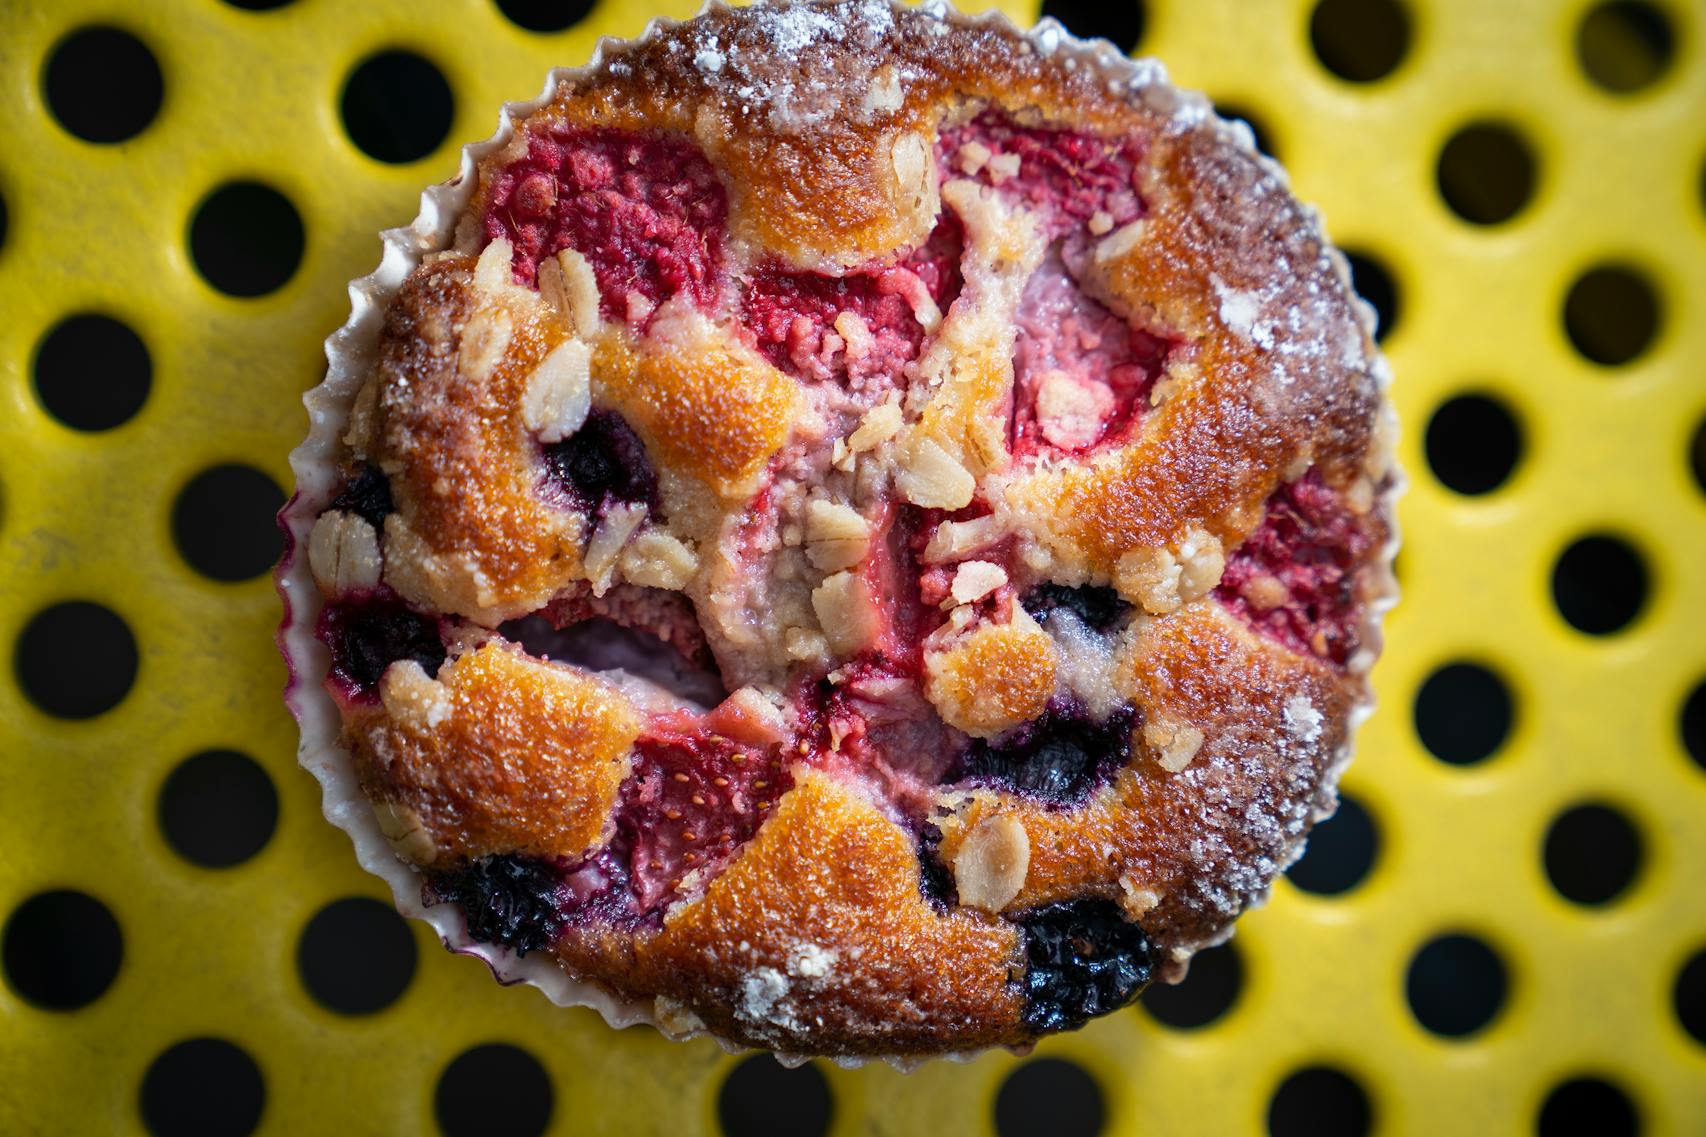 Farmer’s Berry Crumble from Minnesota Farmer’s Union Coffee Shop. The new foods of the 2023 Minnesota State Fair photographed on the first day of the fair in Falcon Heights, Minn. on Tuesday, Aug. 8, 2023. ] LEILA NAVIDI • leila.navidi@startribune.com